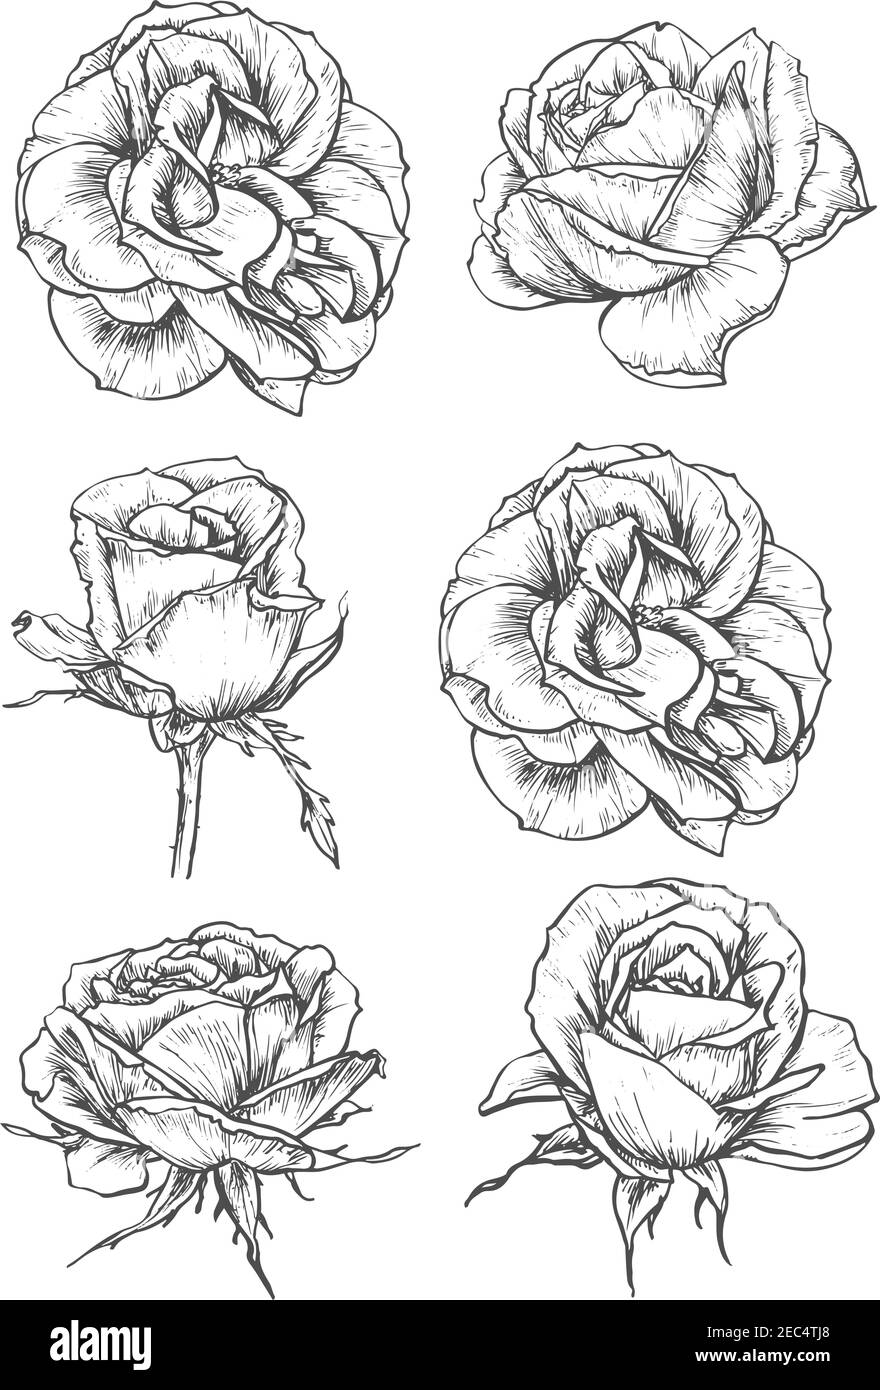 Beautiful Blooming Rose Tattoo Vintage Concept Stock Illustration   Download Image Now  Beauty Belarus Engraved Image  iStock